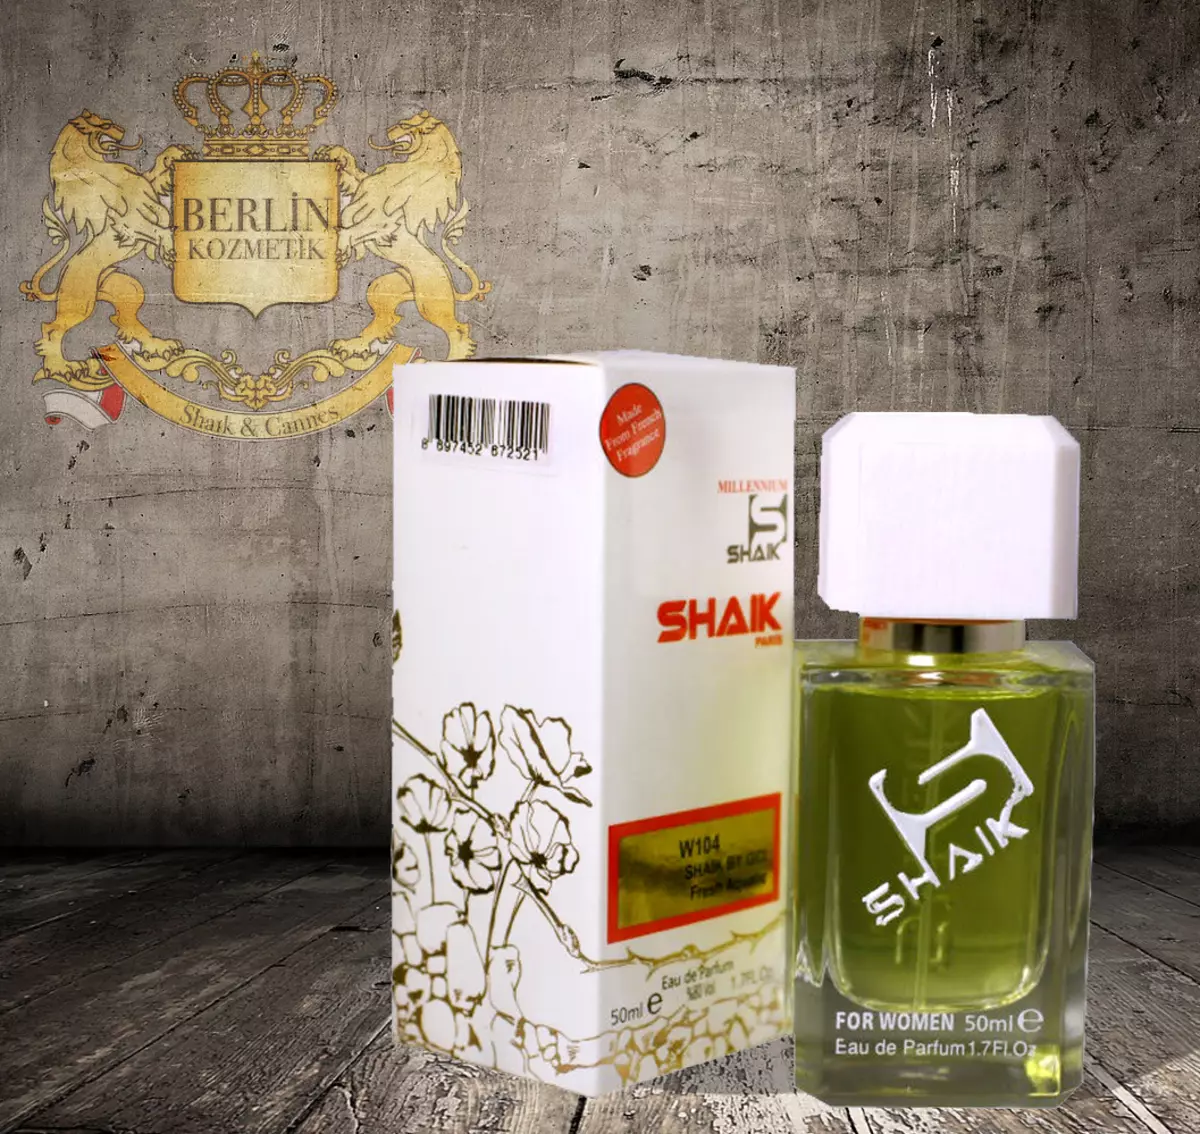 Turkish perfumes: perfume and cologne, colonid, toilet water and other perfumes from Turkey, overview of fragrances for men and women 23398_17